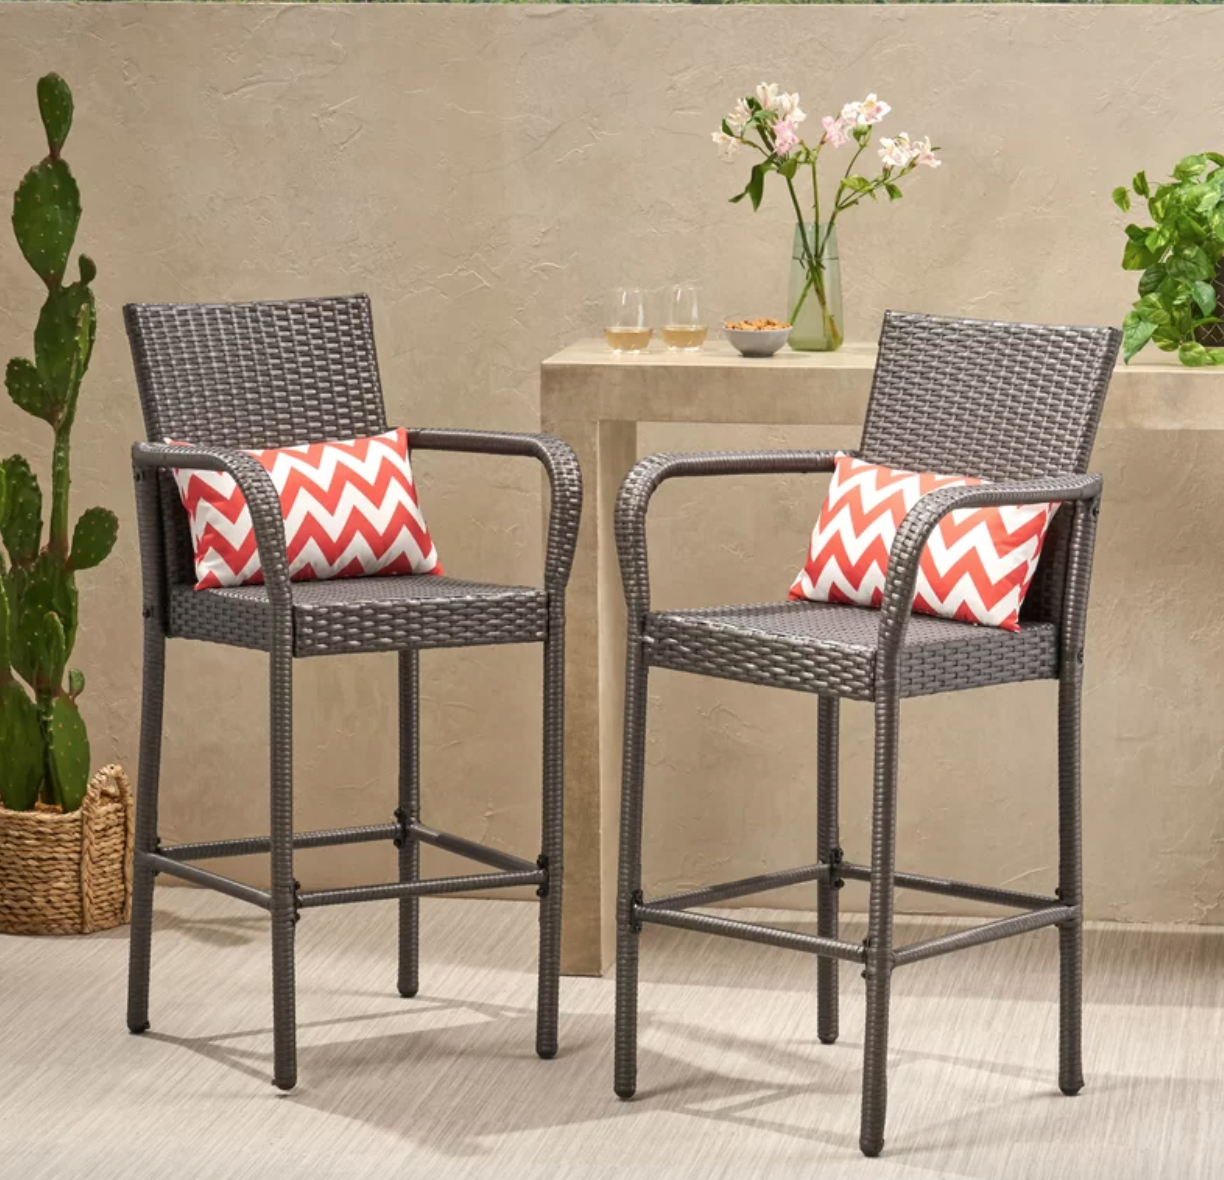 Lansdale 30.25-inch patio bar stool (set of 2, gray): $310 